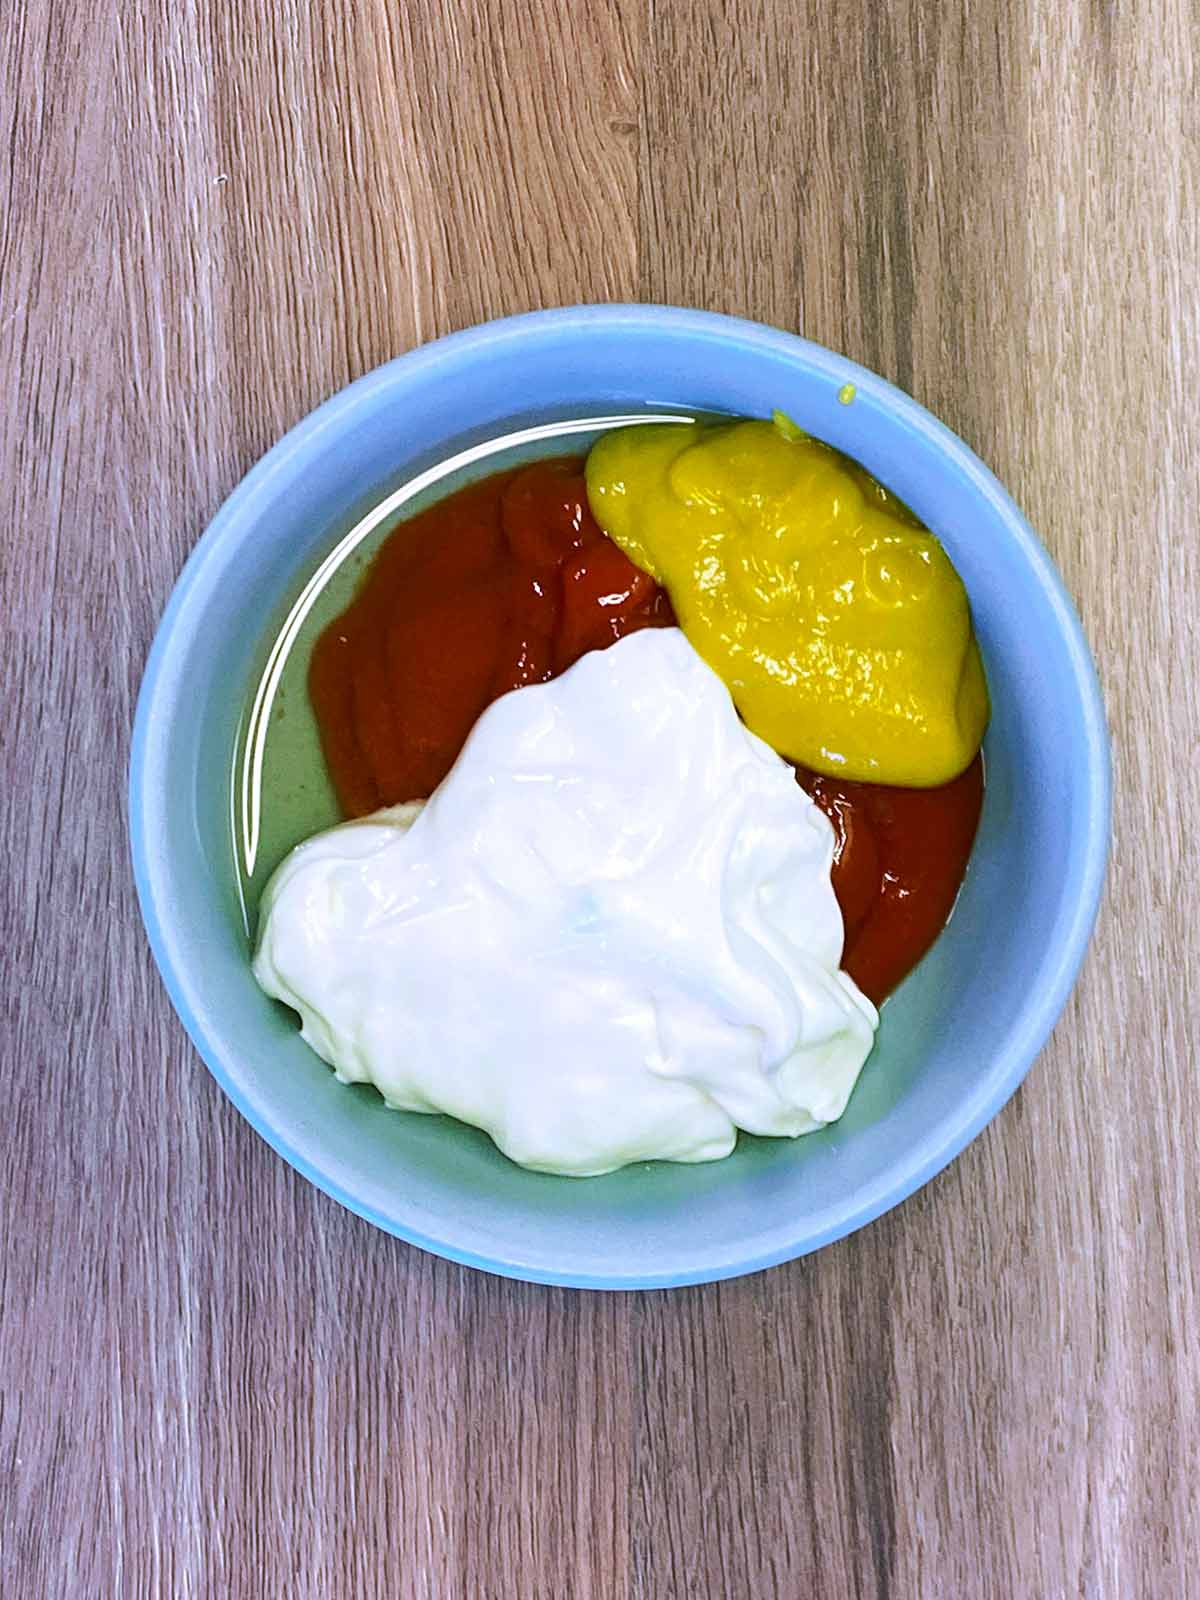 Mayonnaise, ketchup, mustard and pickle juice in a bowl.